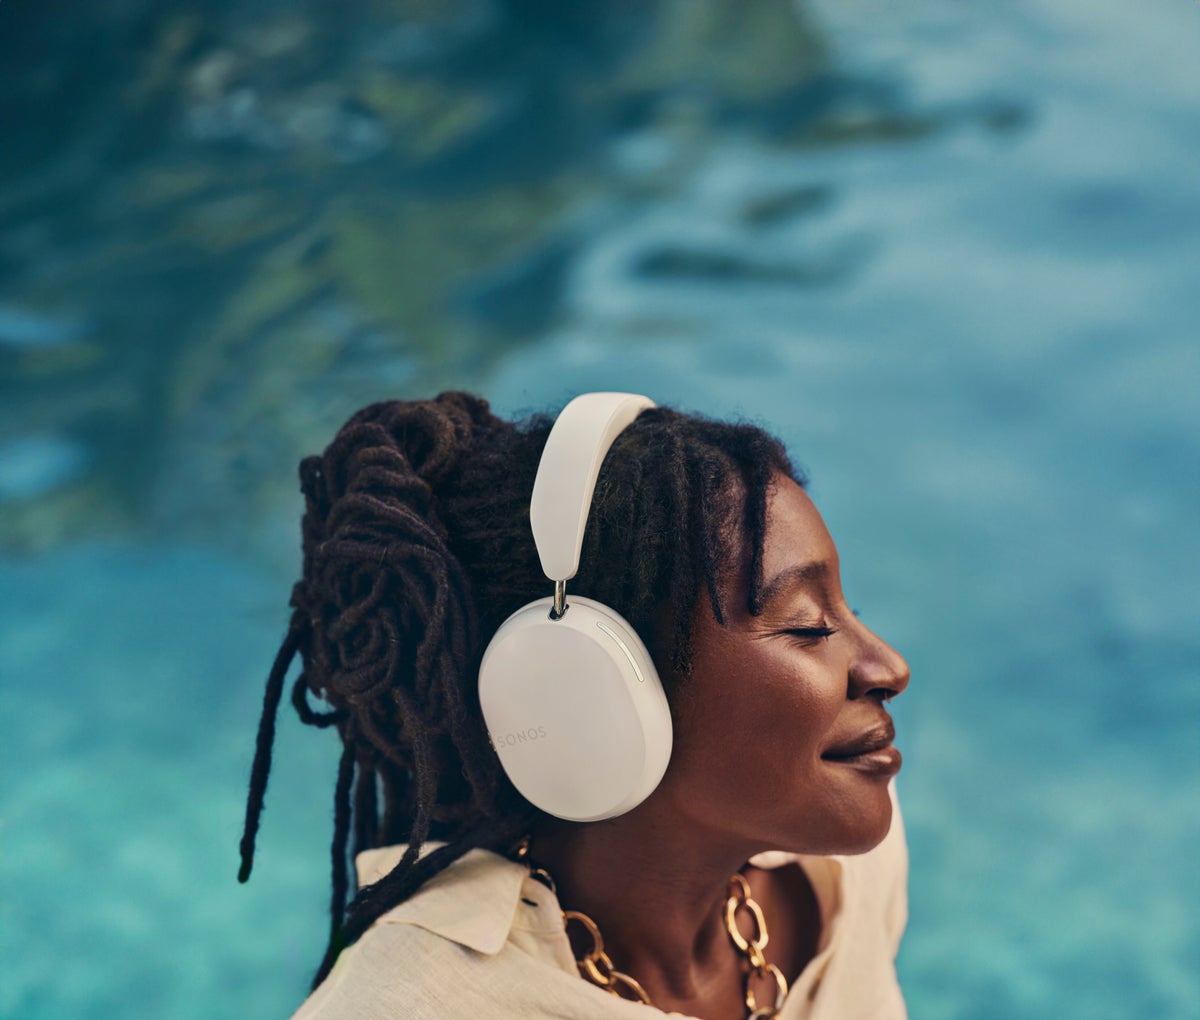 Sonos launches widely anticipated ‘Ace’ headphones – with trick to avoid waking people up